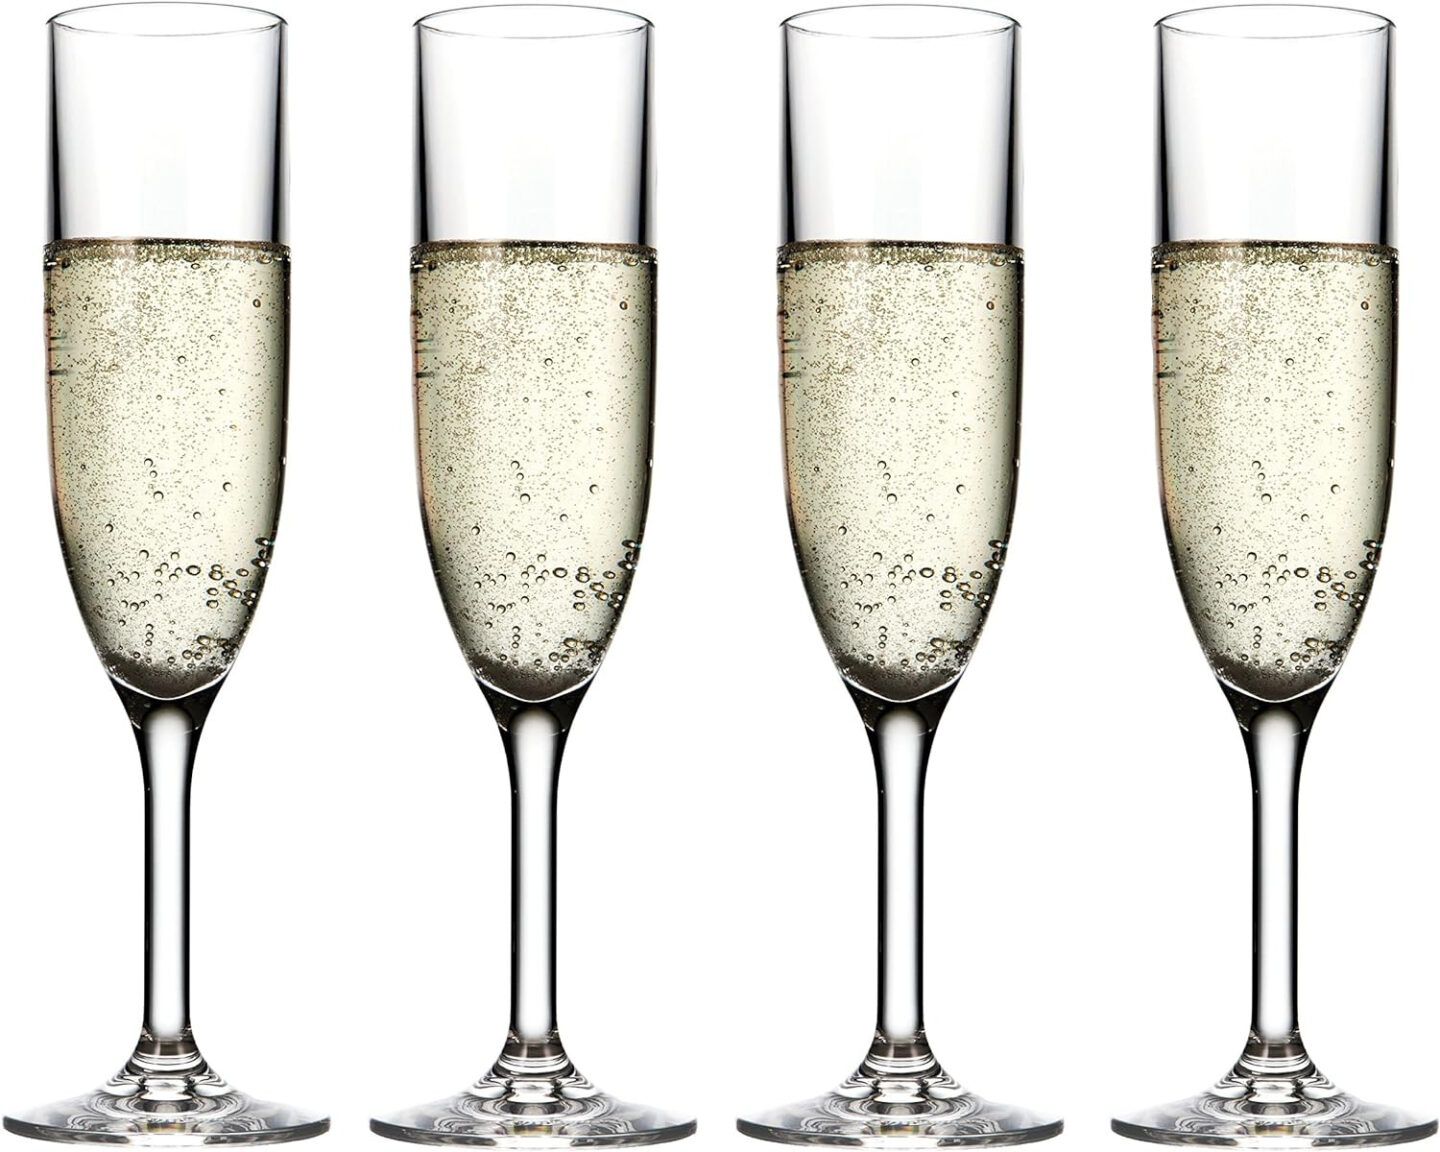 Unbreakable Champagne flutes